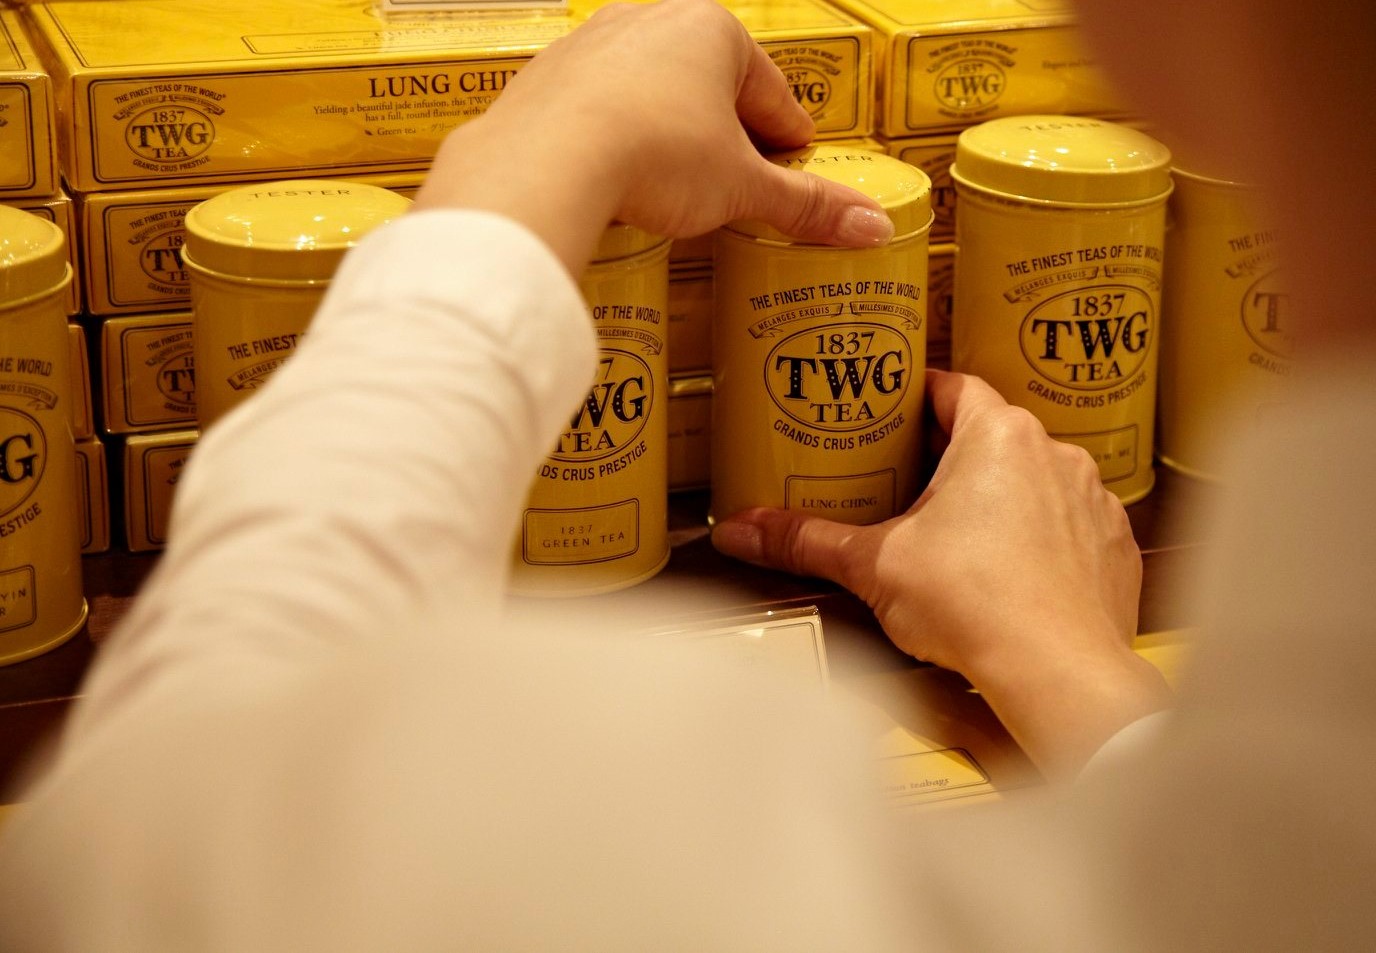 #NowInfusing: Yielding a beautiful jade infusion, this TWG Tea green tea, otherwise known as "Dragon's Well", has a full, round flavour with a fresh aroma that delights the senses. Shop now at TWGTea.Com! #TWGTeaOfficial